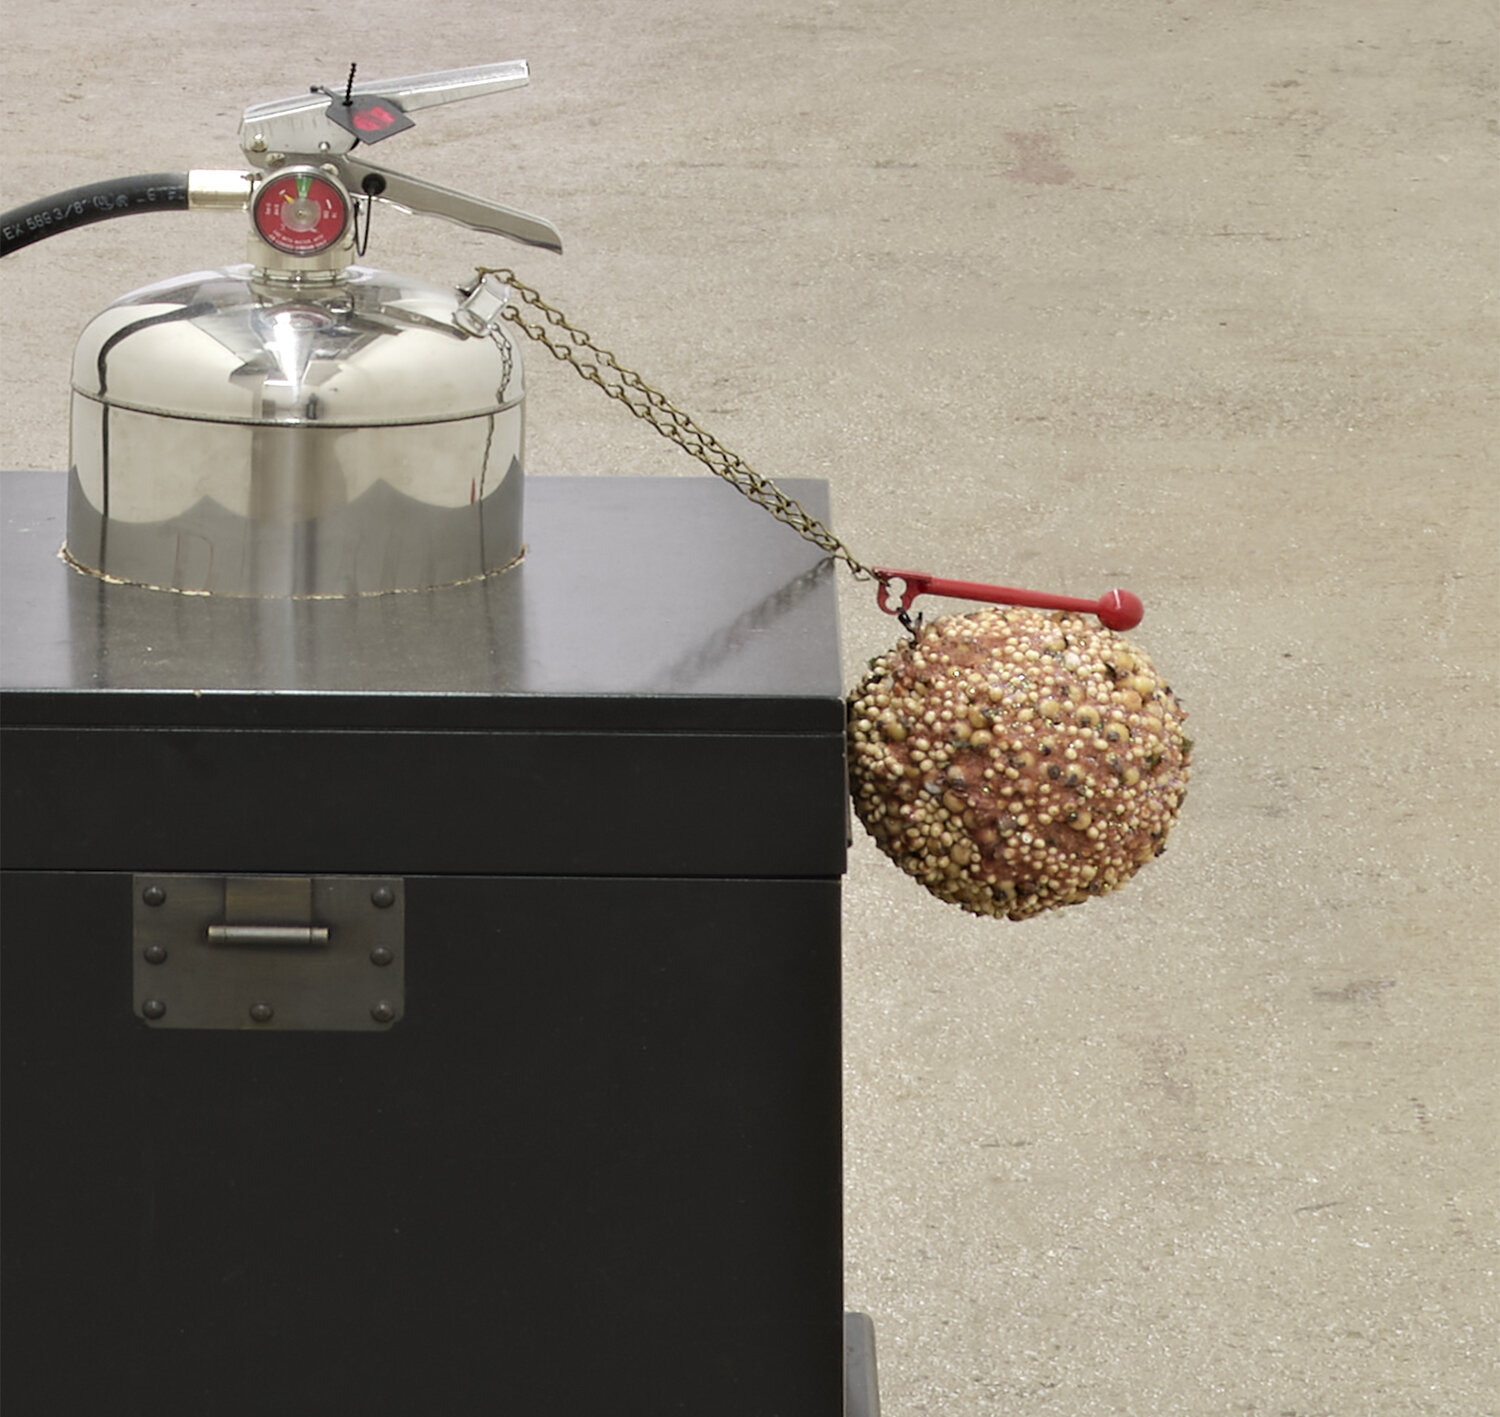  Kevin Hernández Rosa  Lightning for for , 2021 (detail) metal case, type A fire extinguisher filled with Drano, glass breaking hammer,  HDPE, Christmas ornament, Utz cheese balls, red dye, black ink, glitter, epoxy 27 x 18 x 25 inches (69 x 46 x 64 